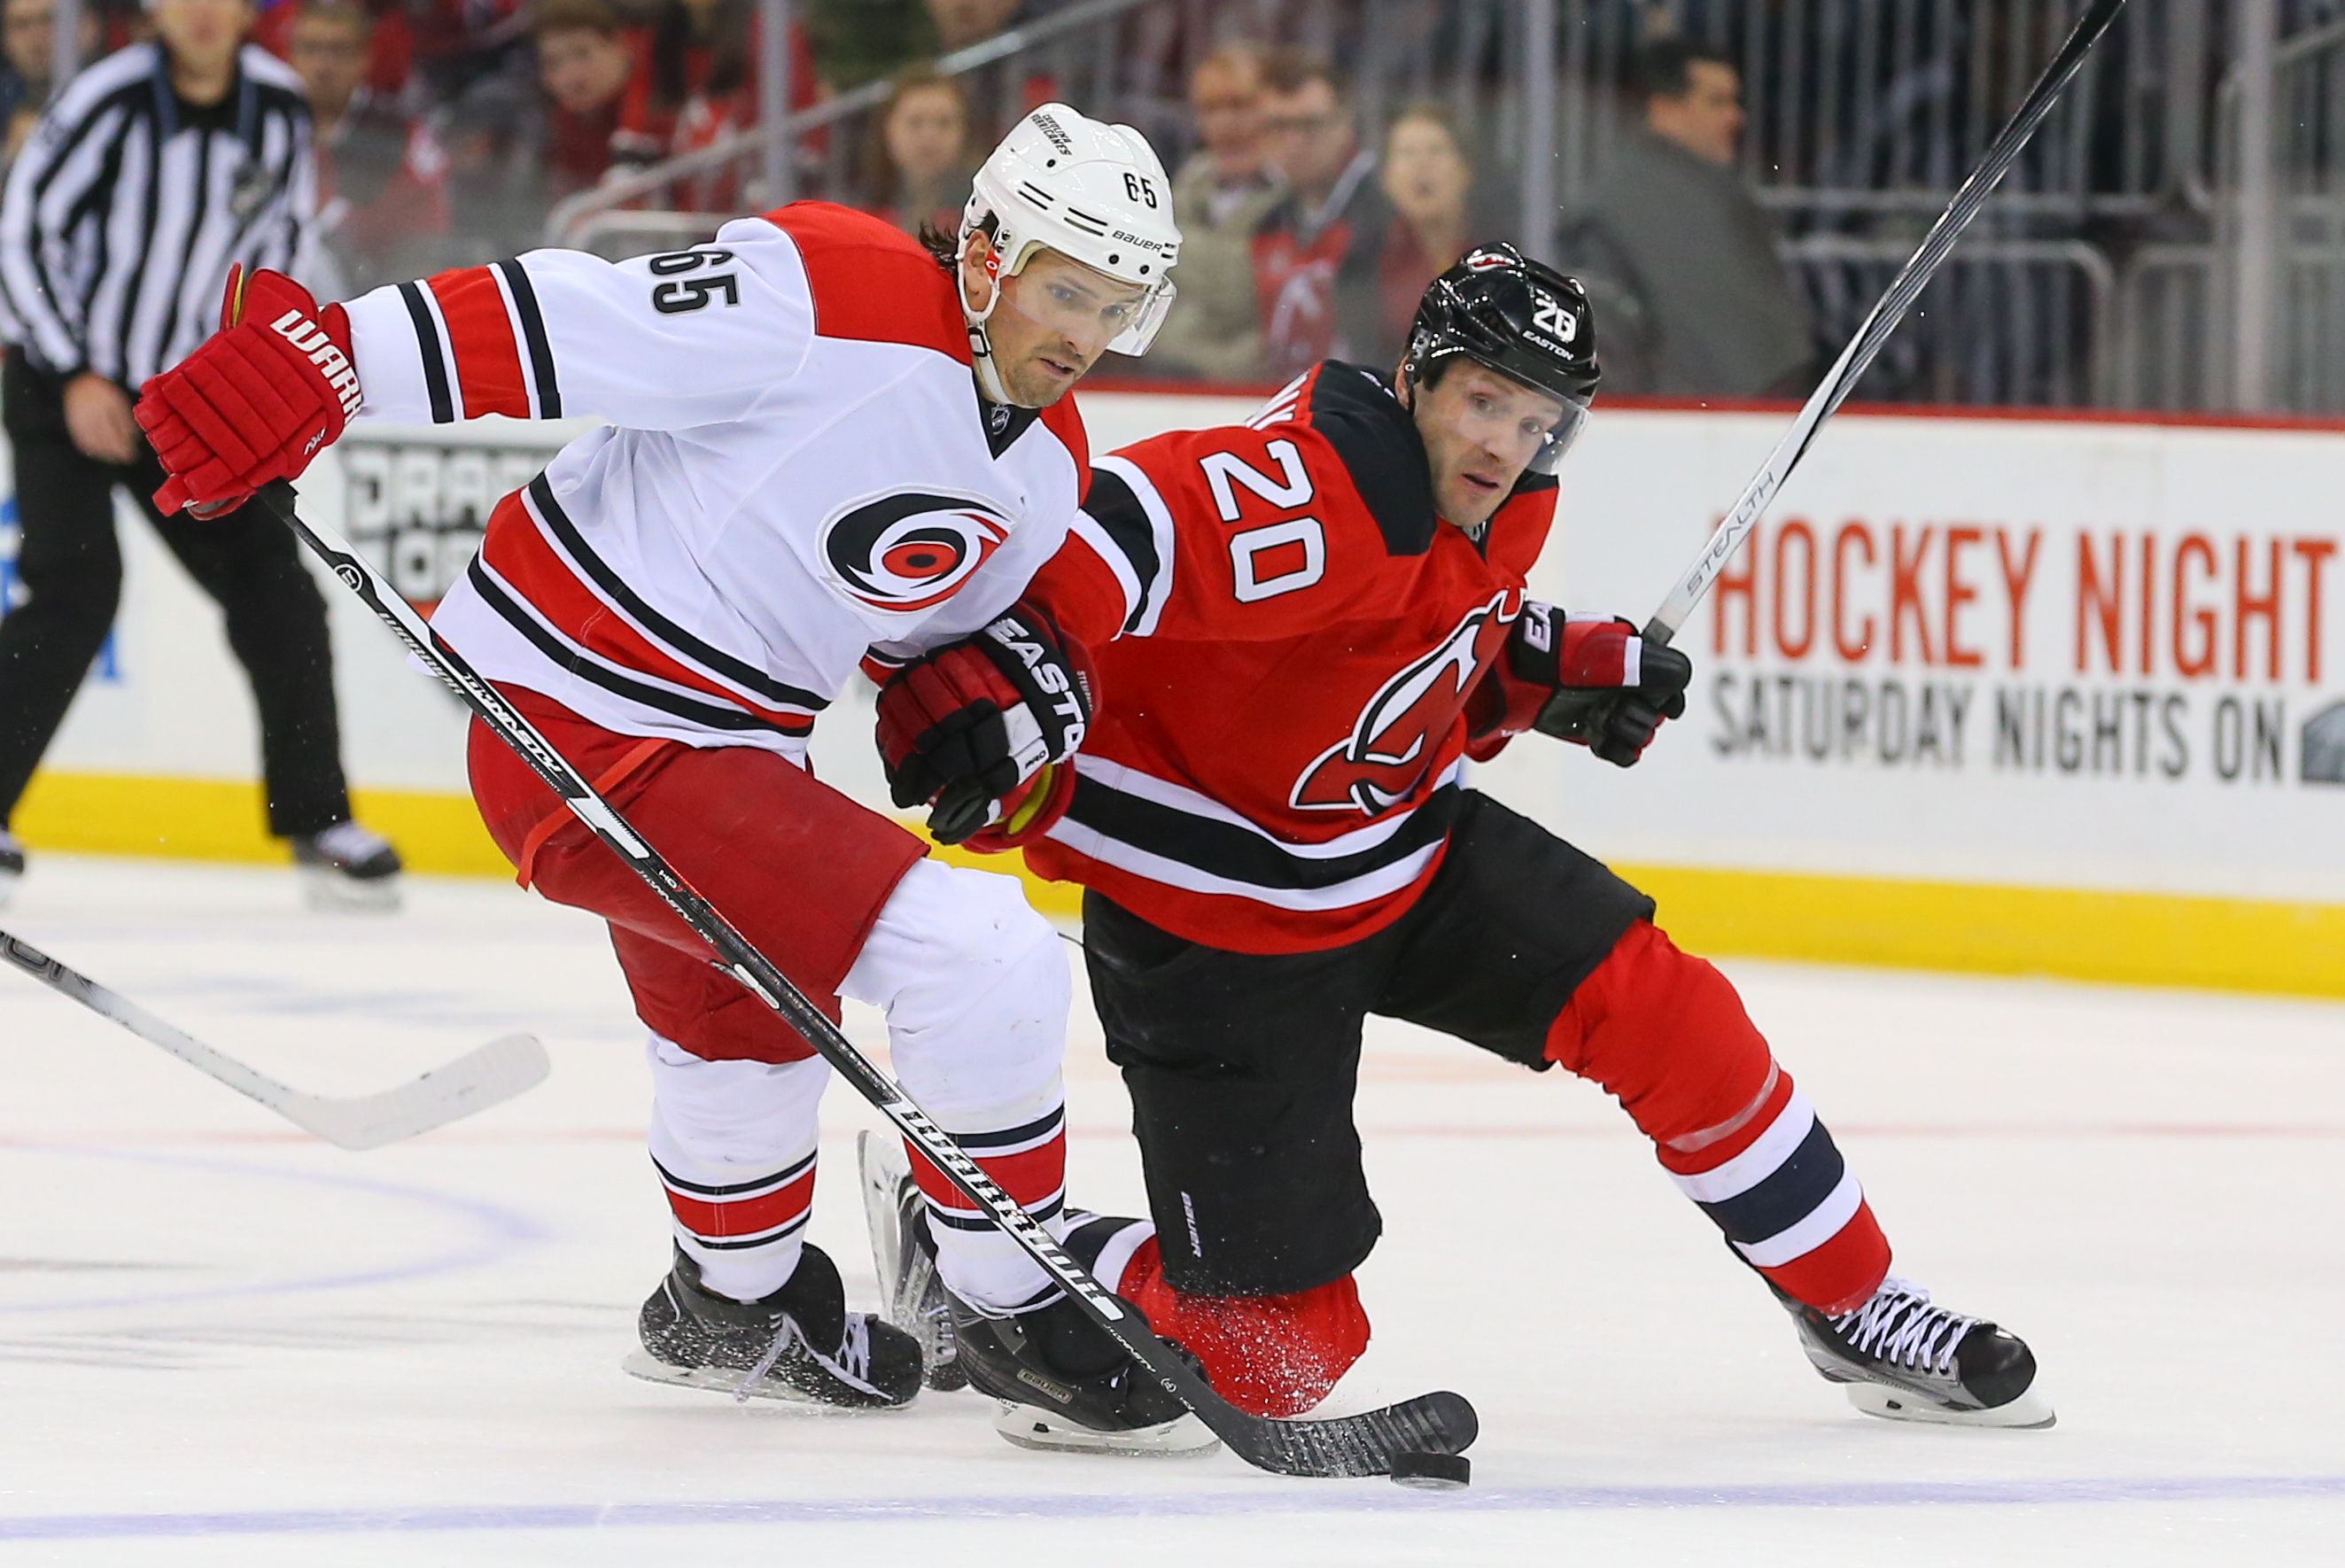 Lee Stempniak battles with Ron Hainsey in NHL action